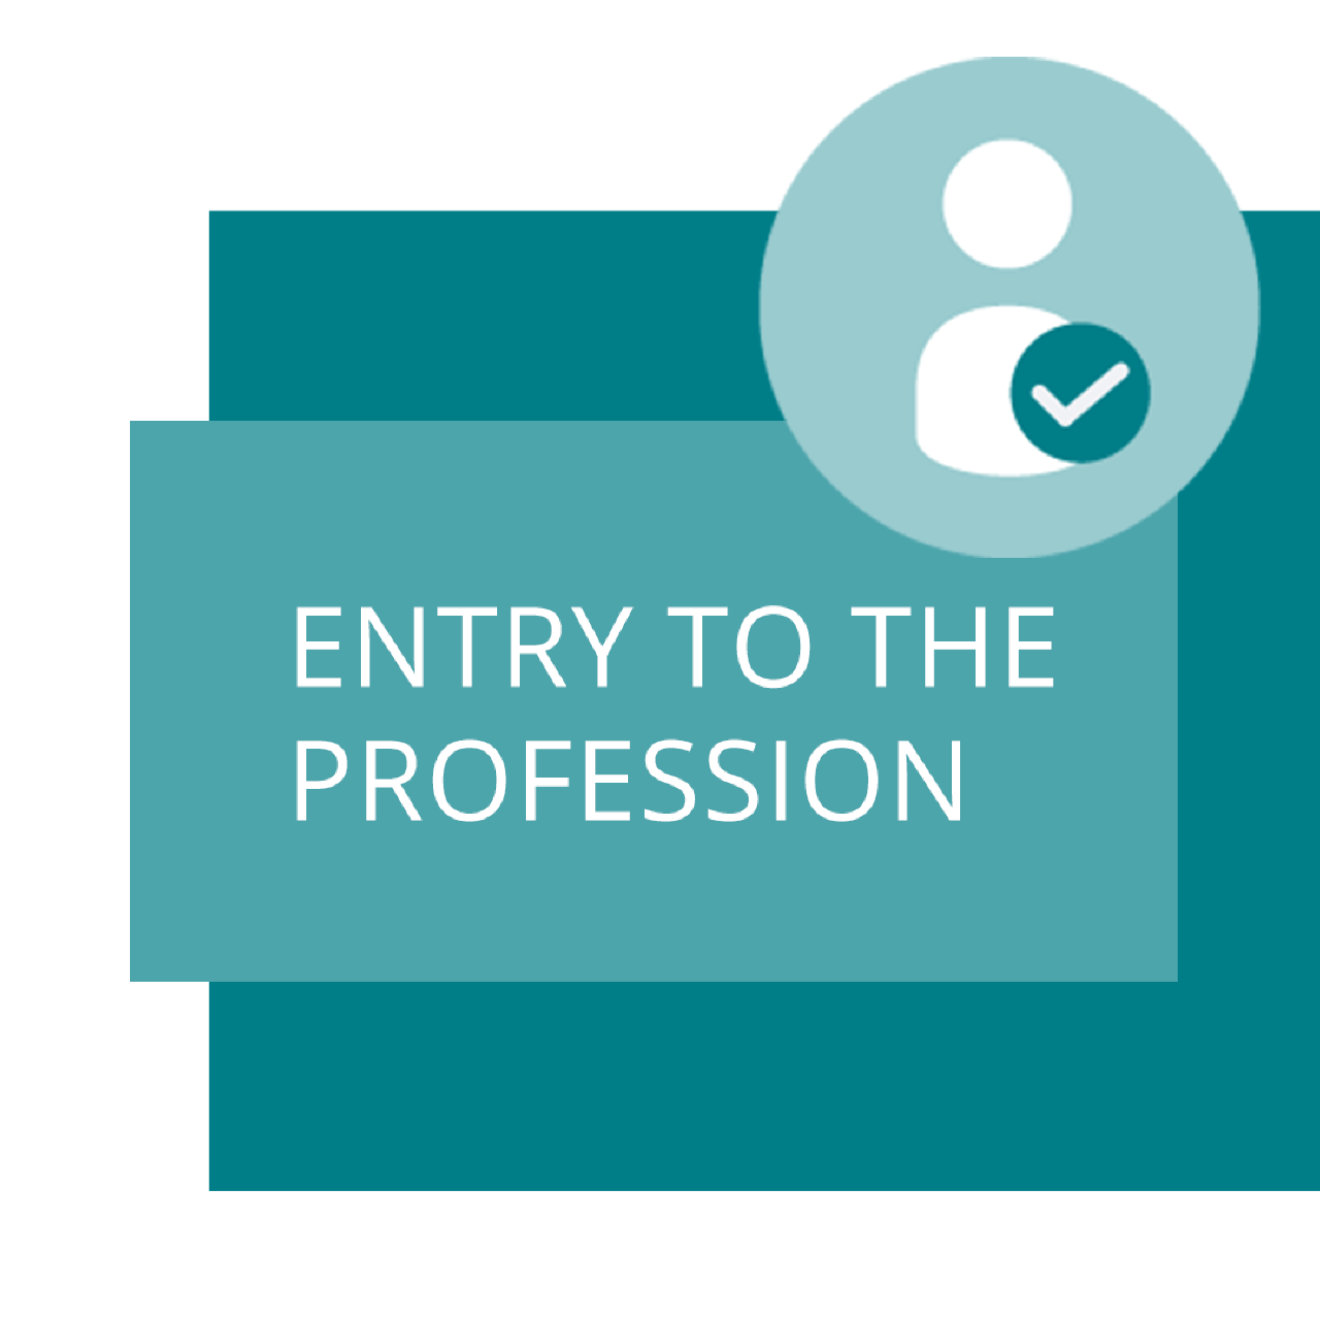 Entry to the profession